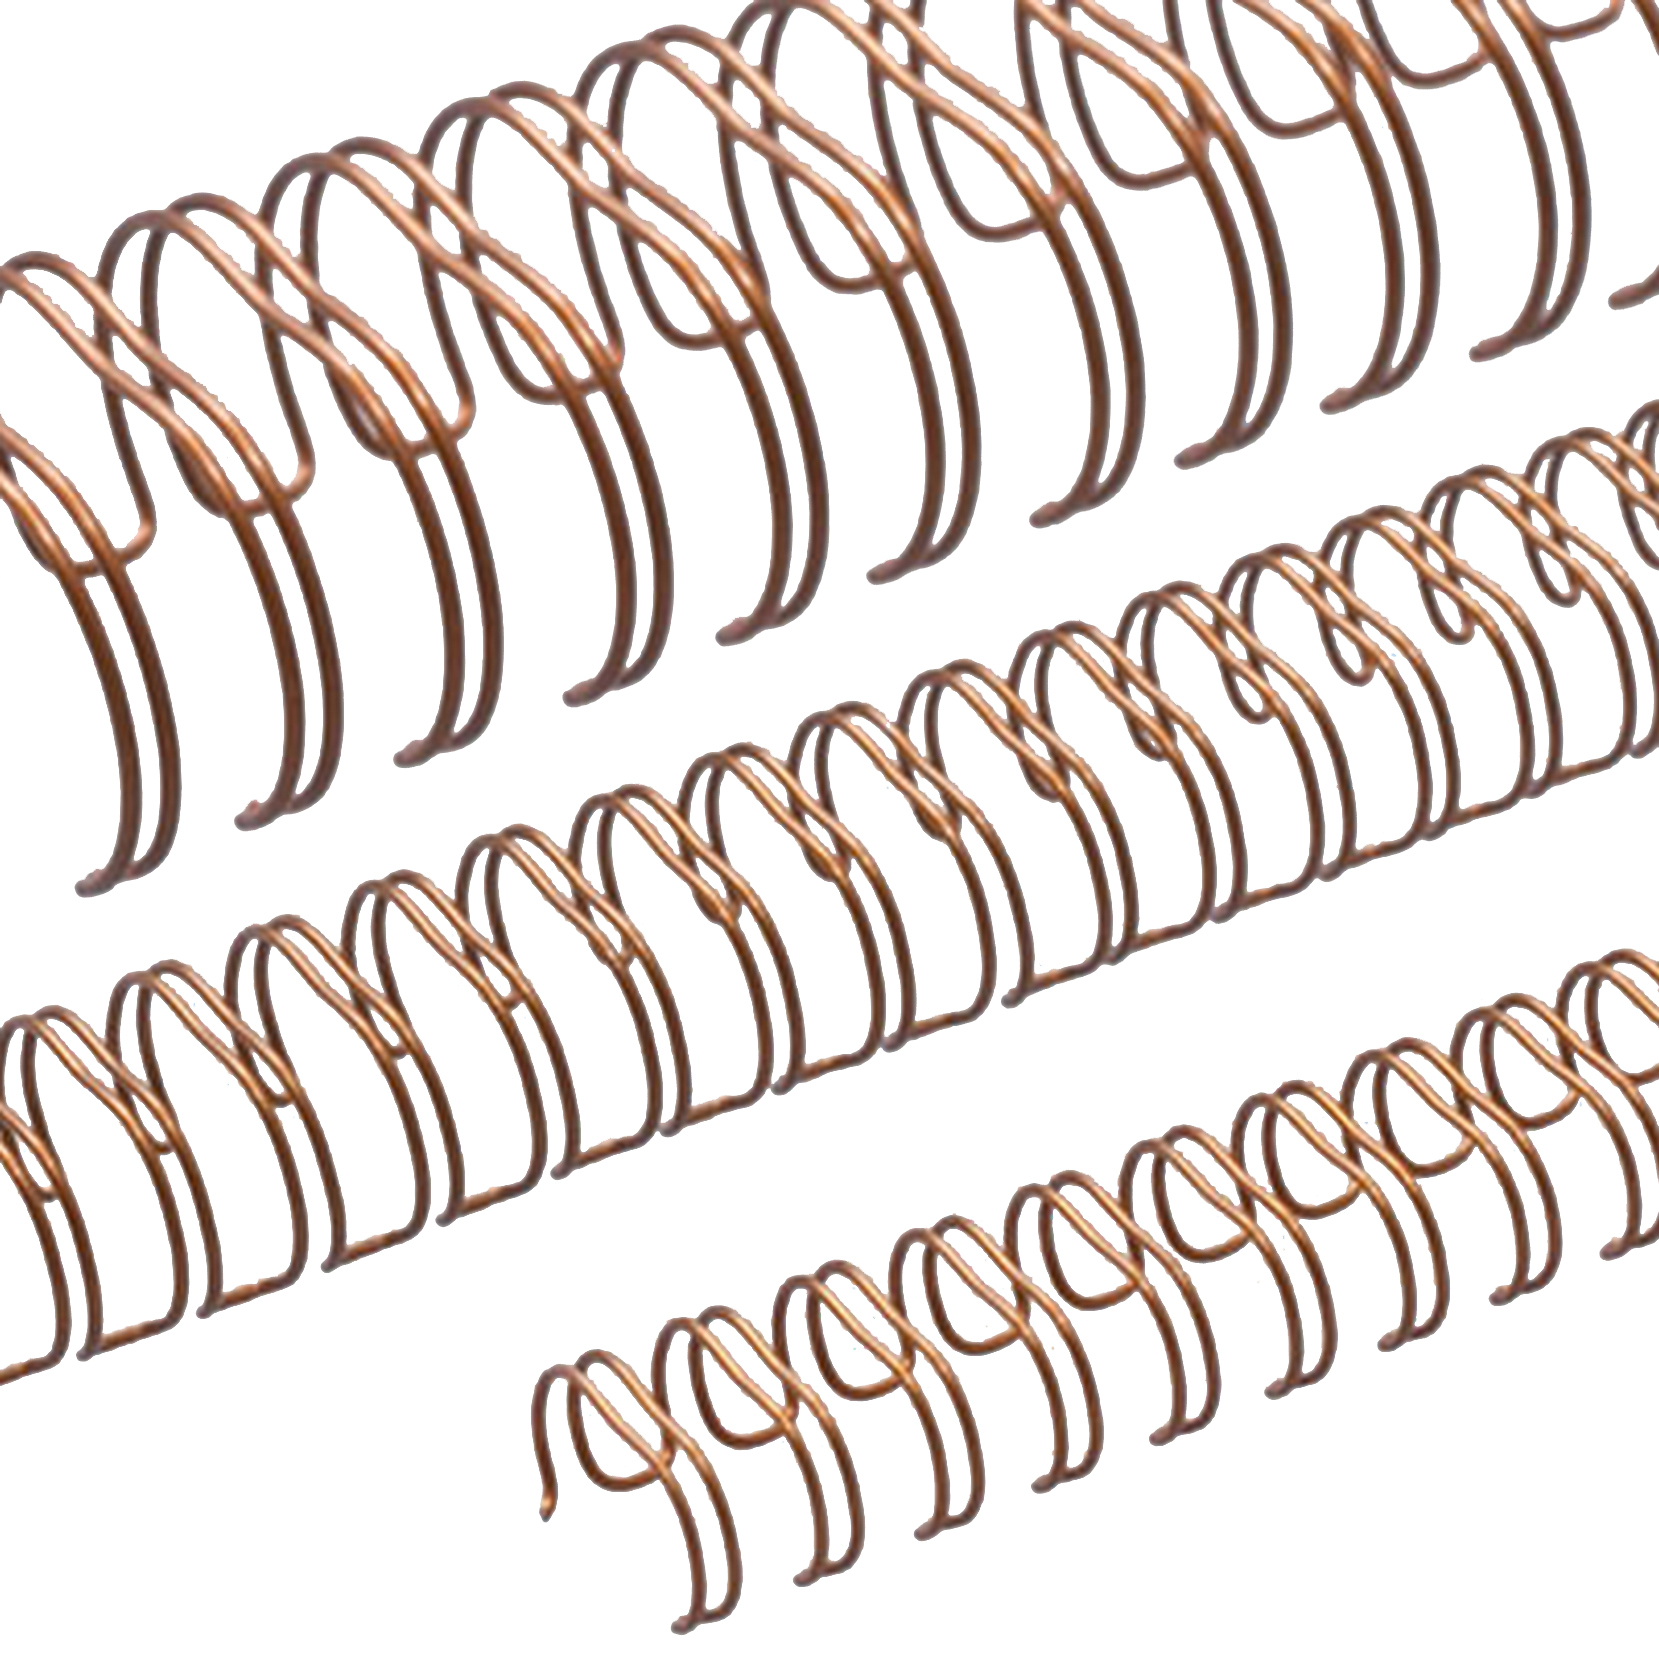 Wire comb bindings - 3:1 pitch - Diameter (in mm) 5.5 (3/16") - Colour bronze - to be processed in wire-comb binding machines...